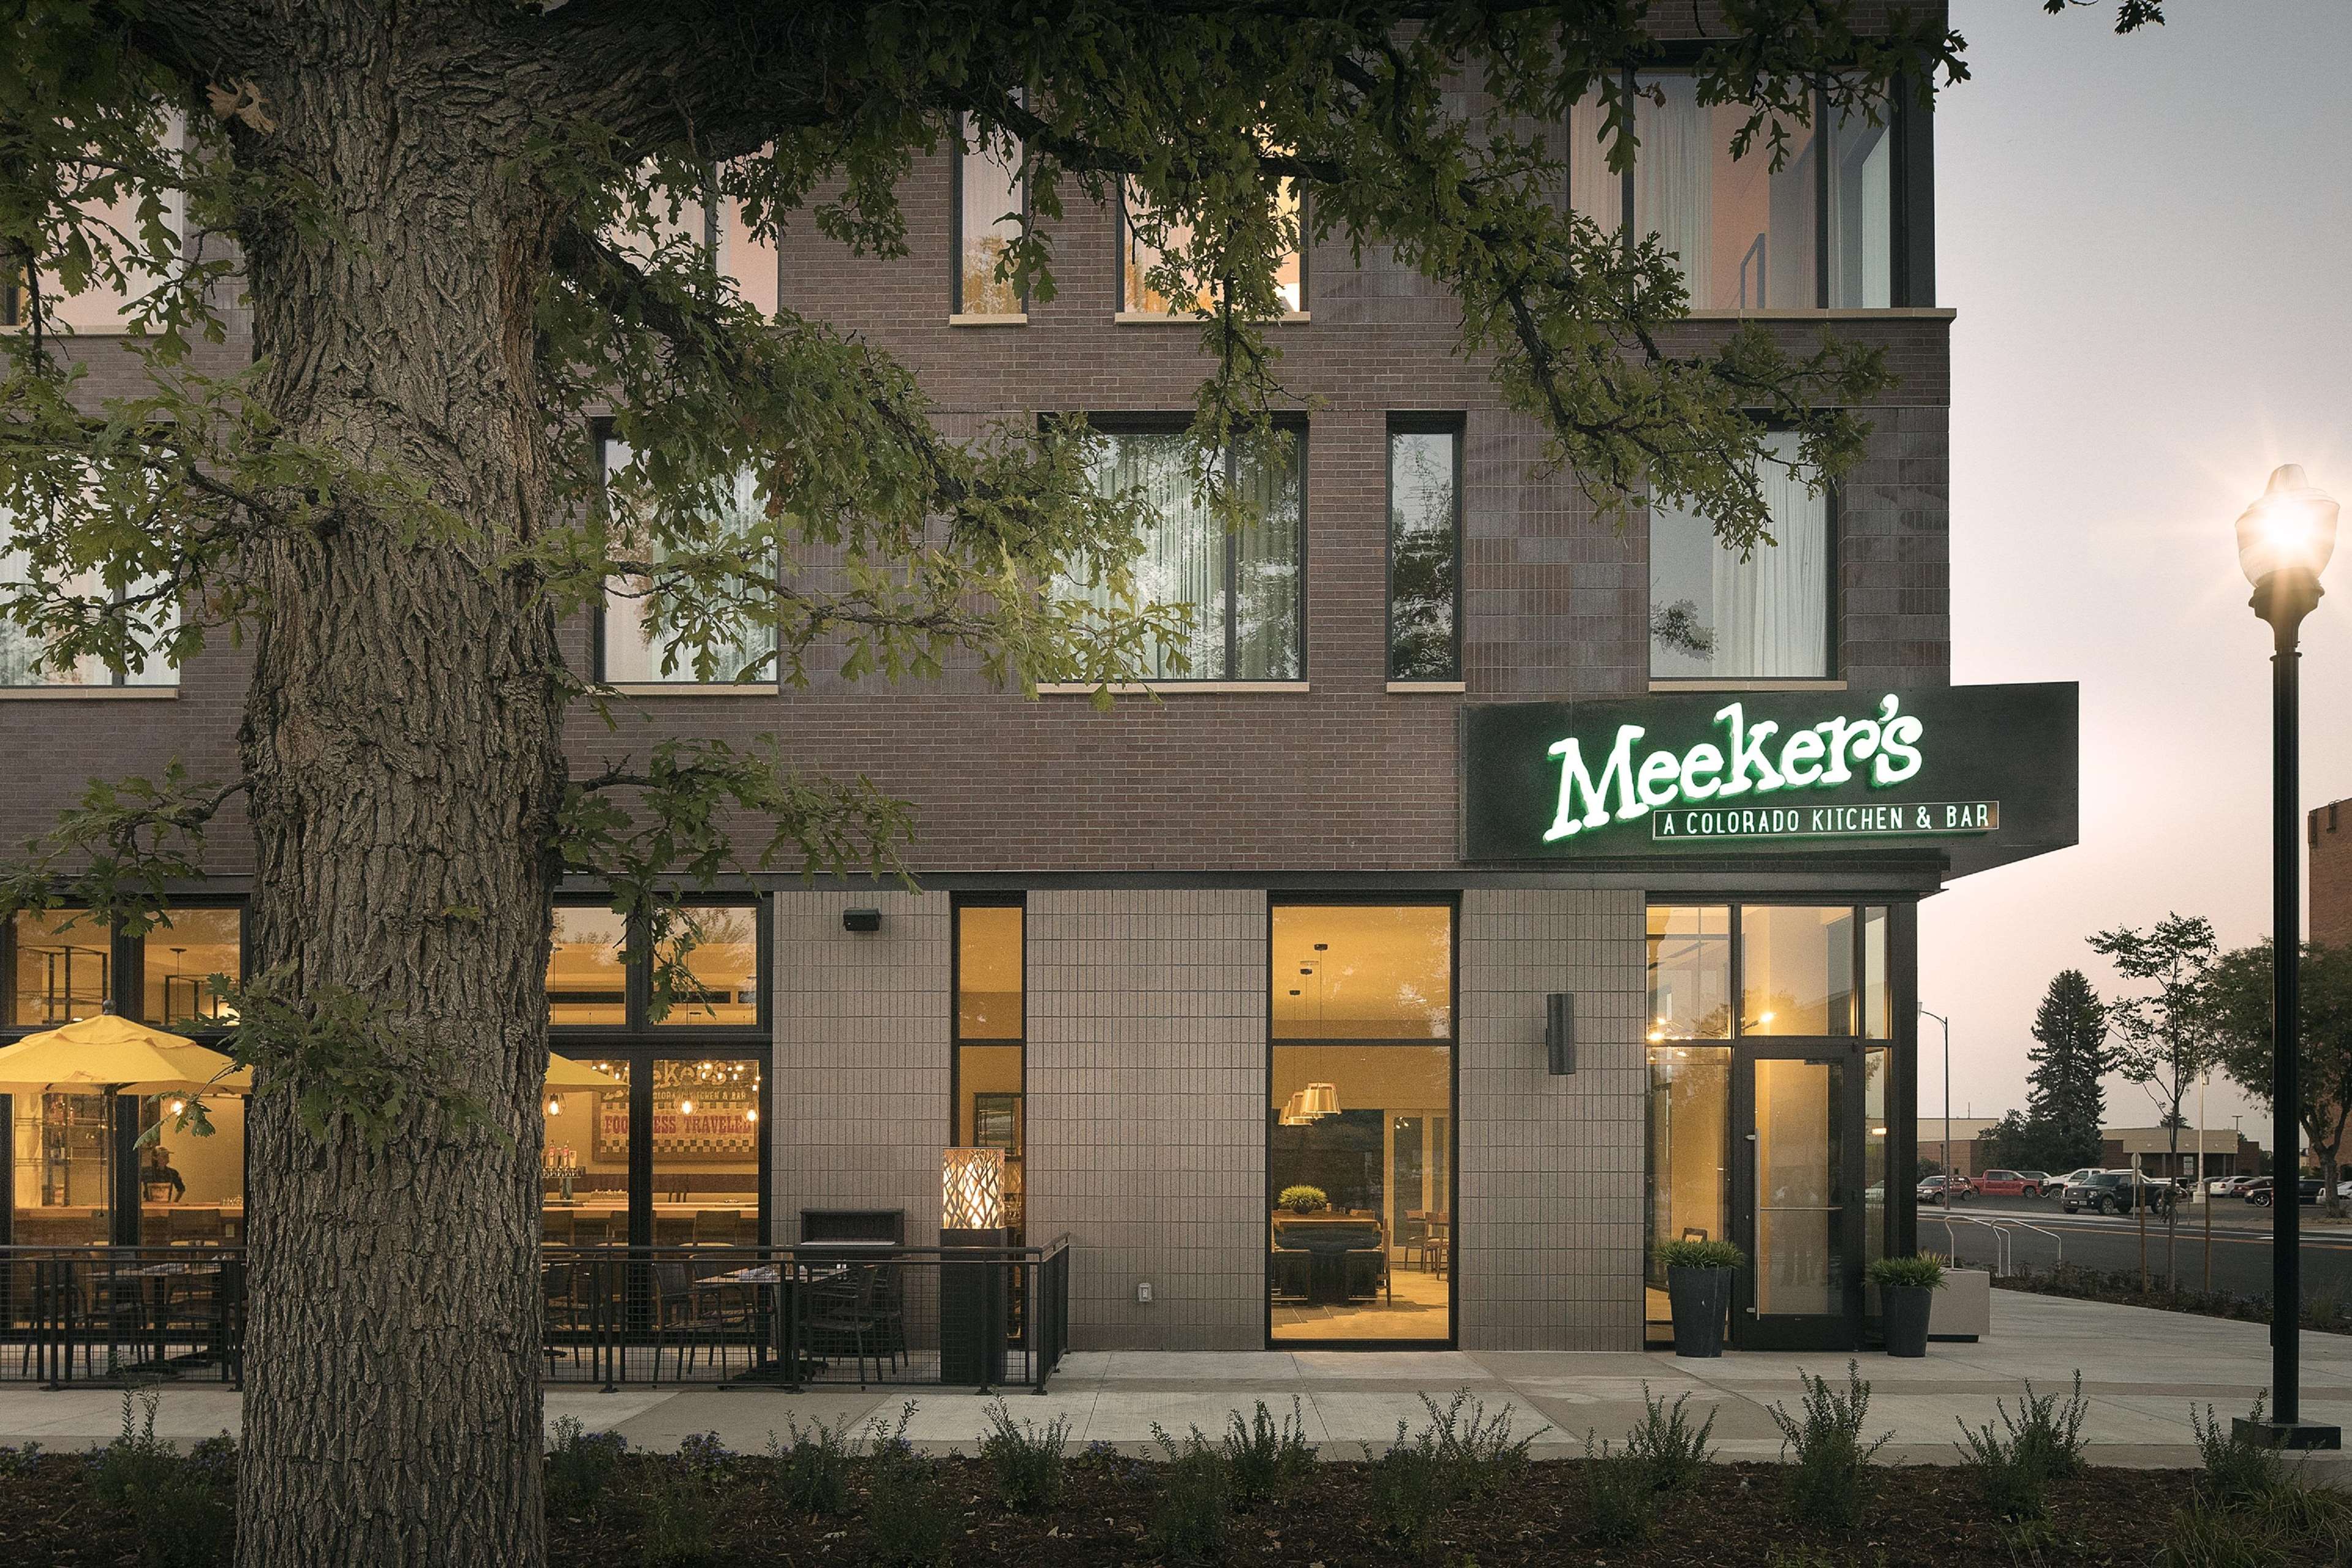 DoubleTree by Hilton Greeley at Lincoln Park Photo